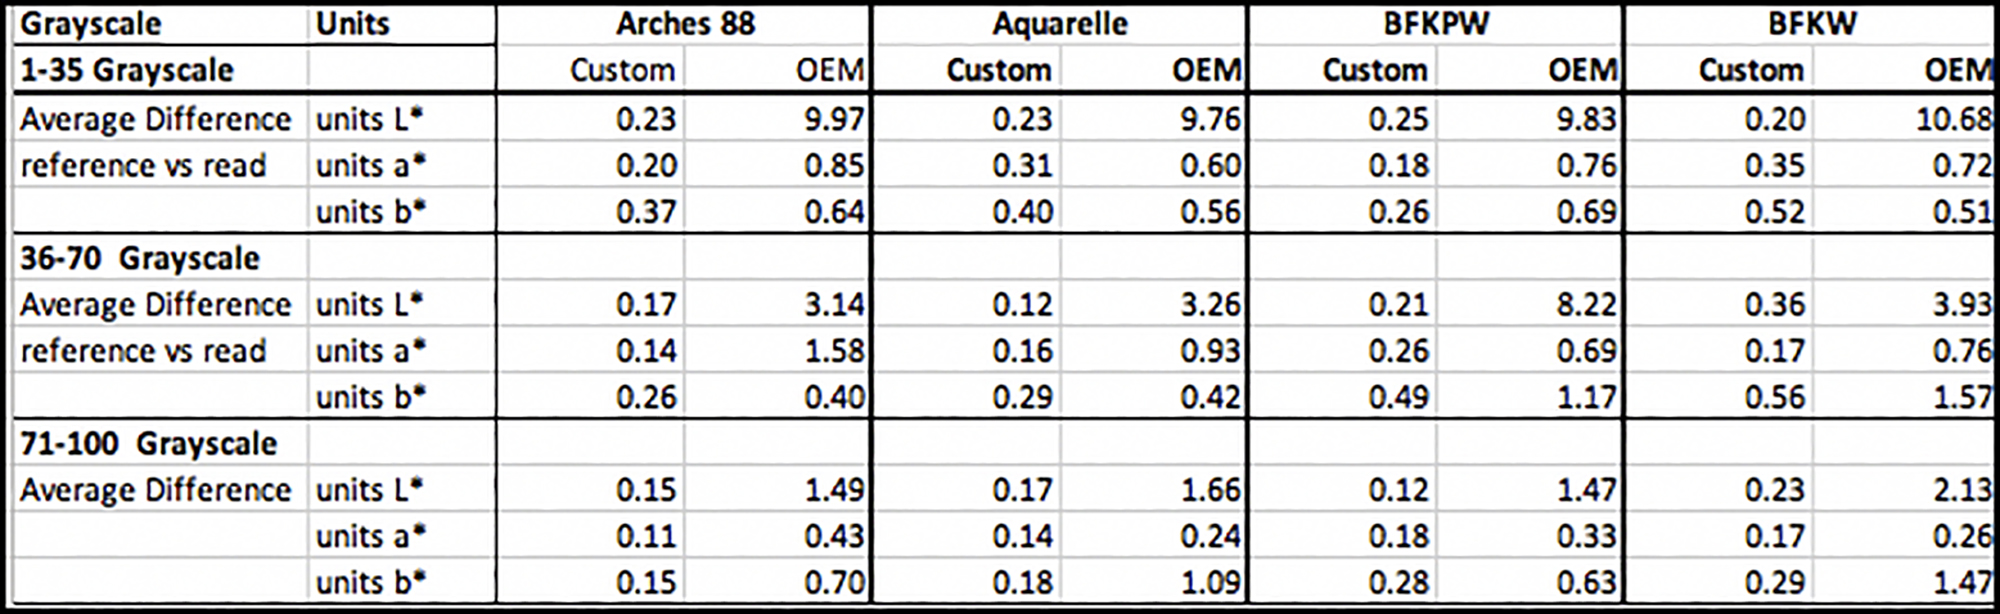 Figure 11. Profiling Outcomes, Grayscale, 43 Patches, OEM and Custom profiles